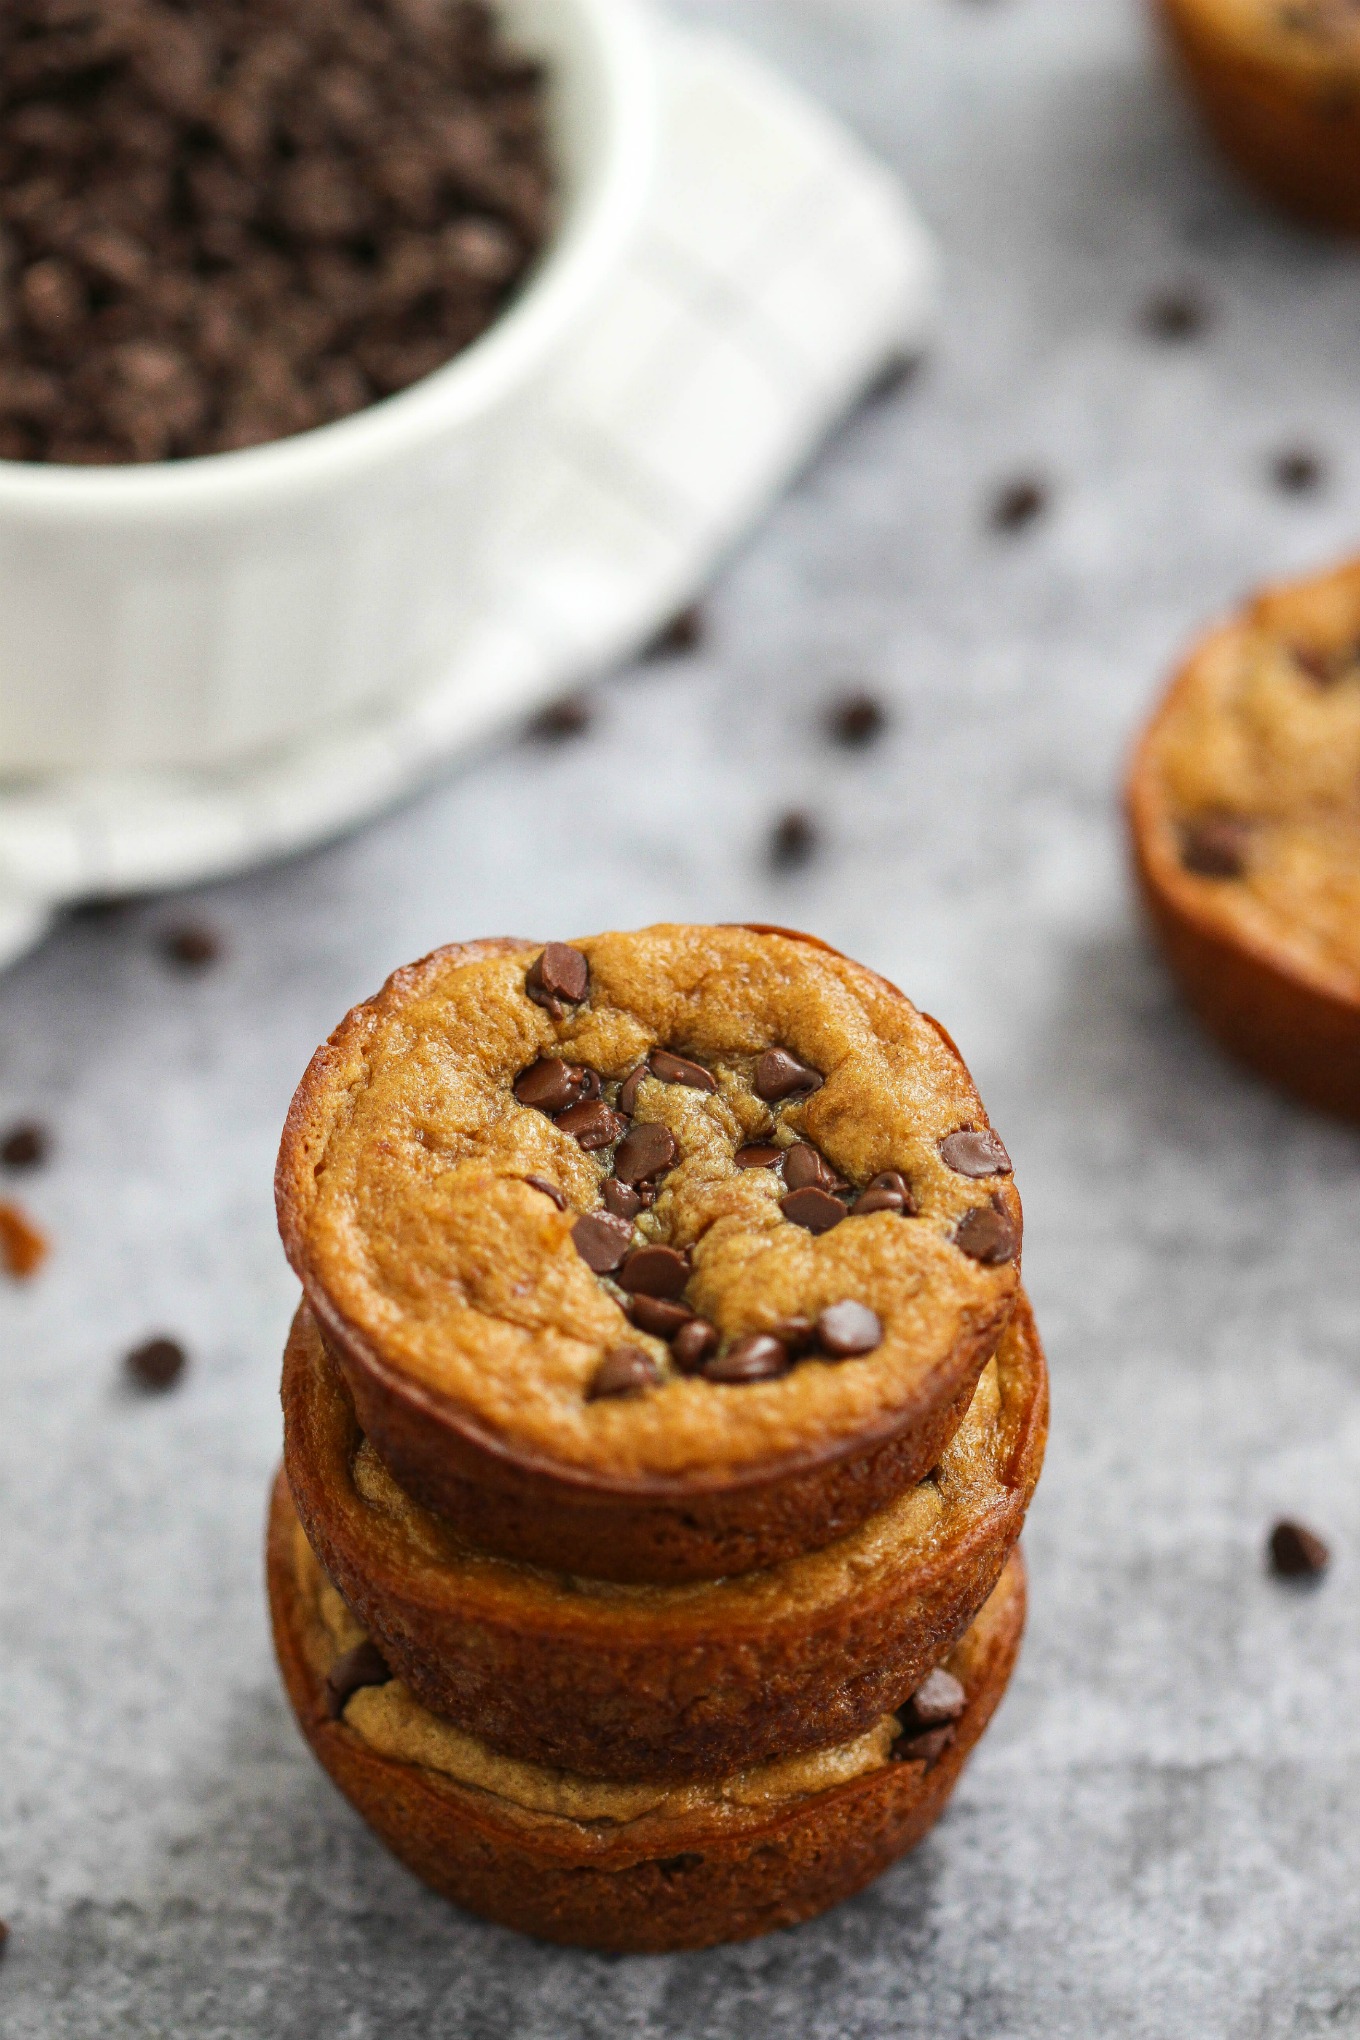 This muffin recipe couldn't get any easier my friends and it's a now a go-to in our after school snack rotation! They're delicious and can be thrown together in a snap with just 5 ingredients you're sure to have on hand.